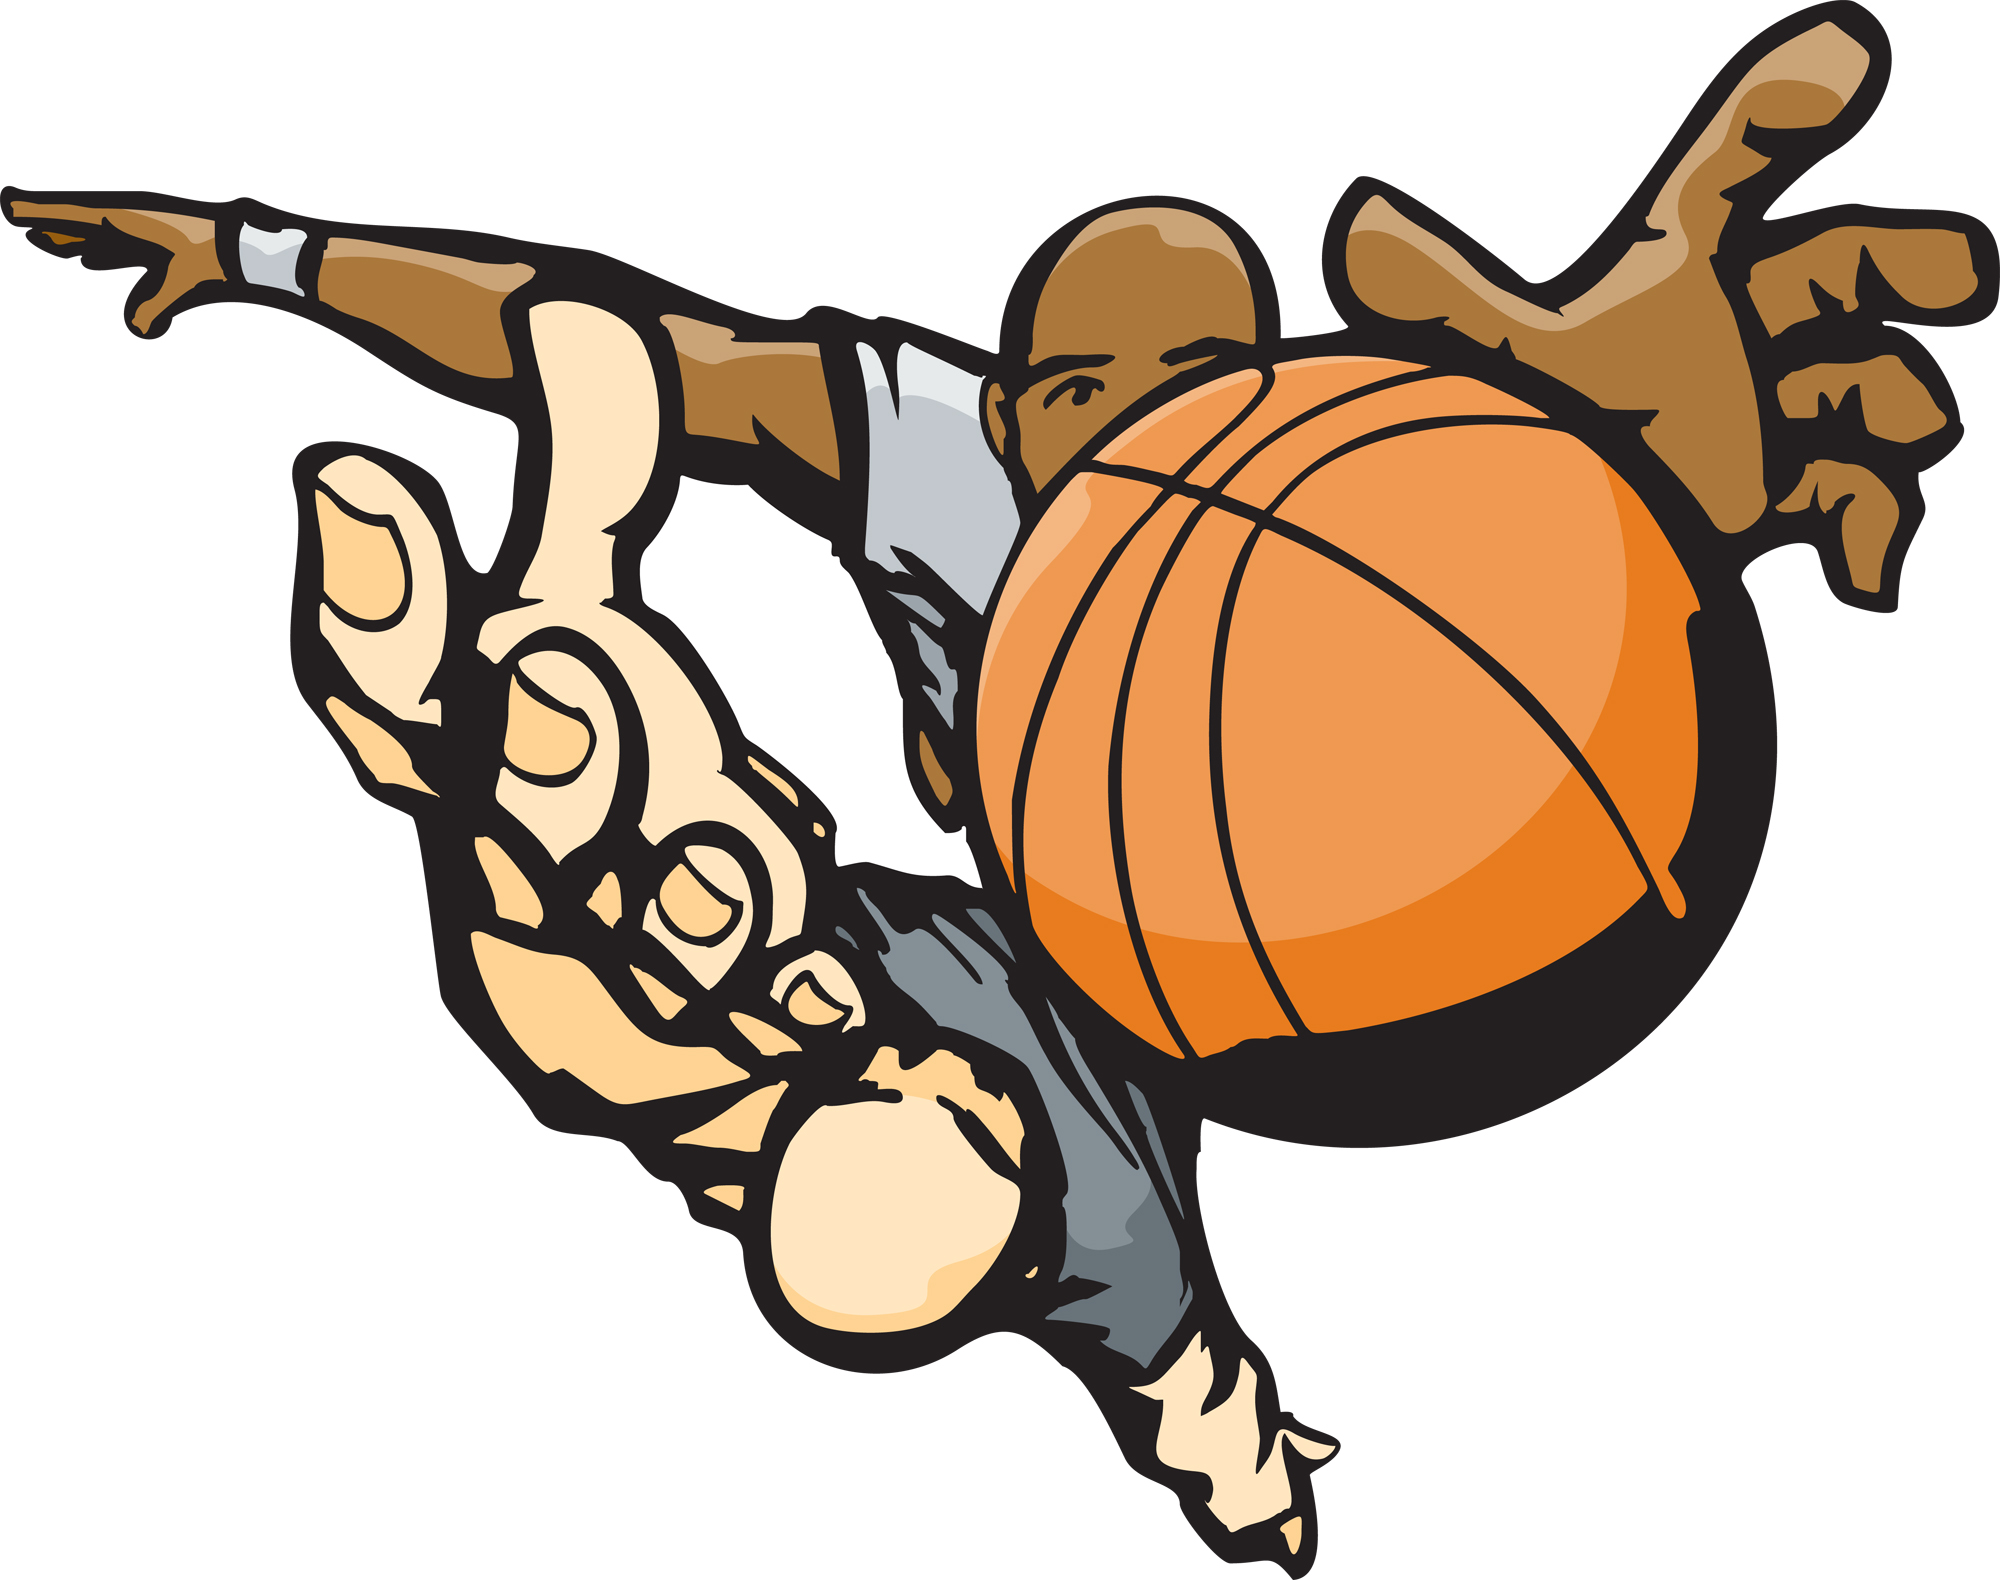 Basketball game clipart